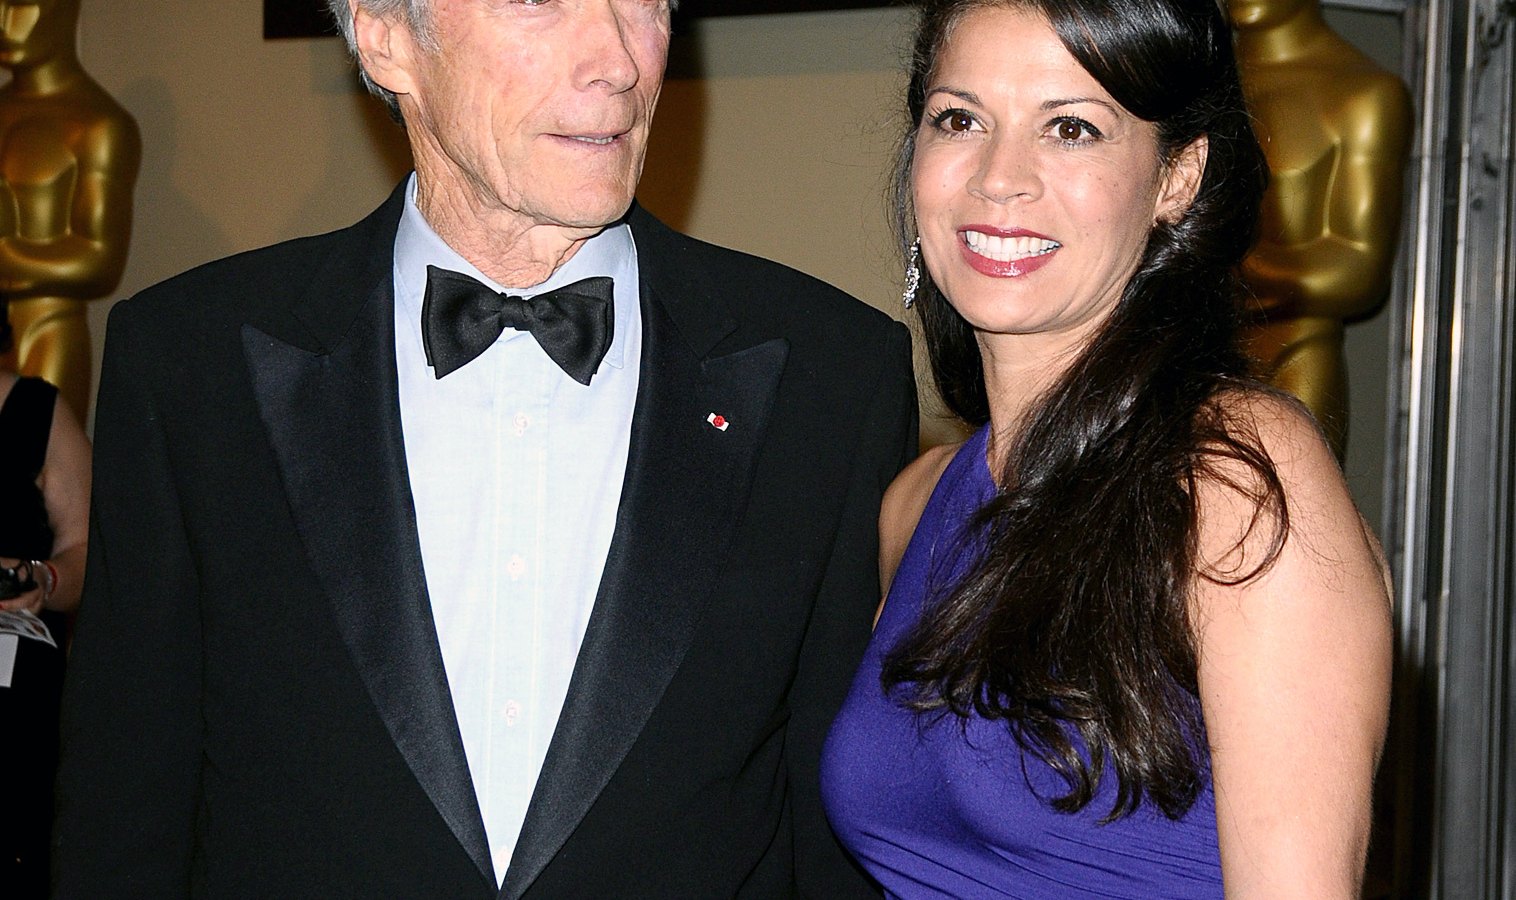 Clint Eastwood and Dina Eastwood on November 13, 2010 in Hollywood